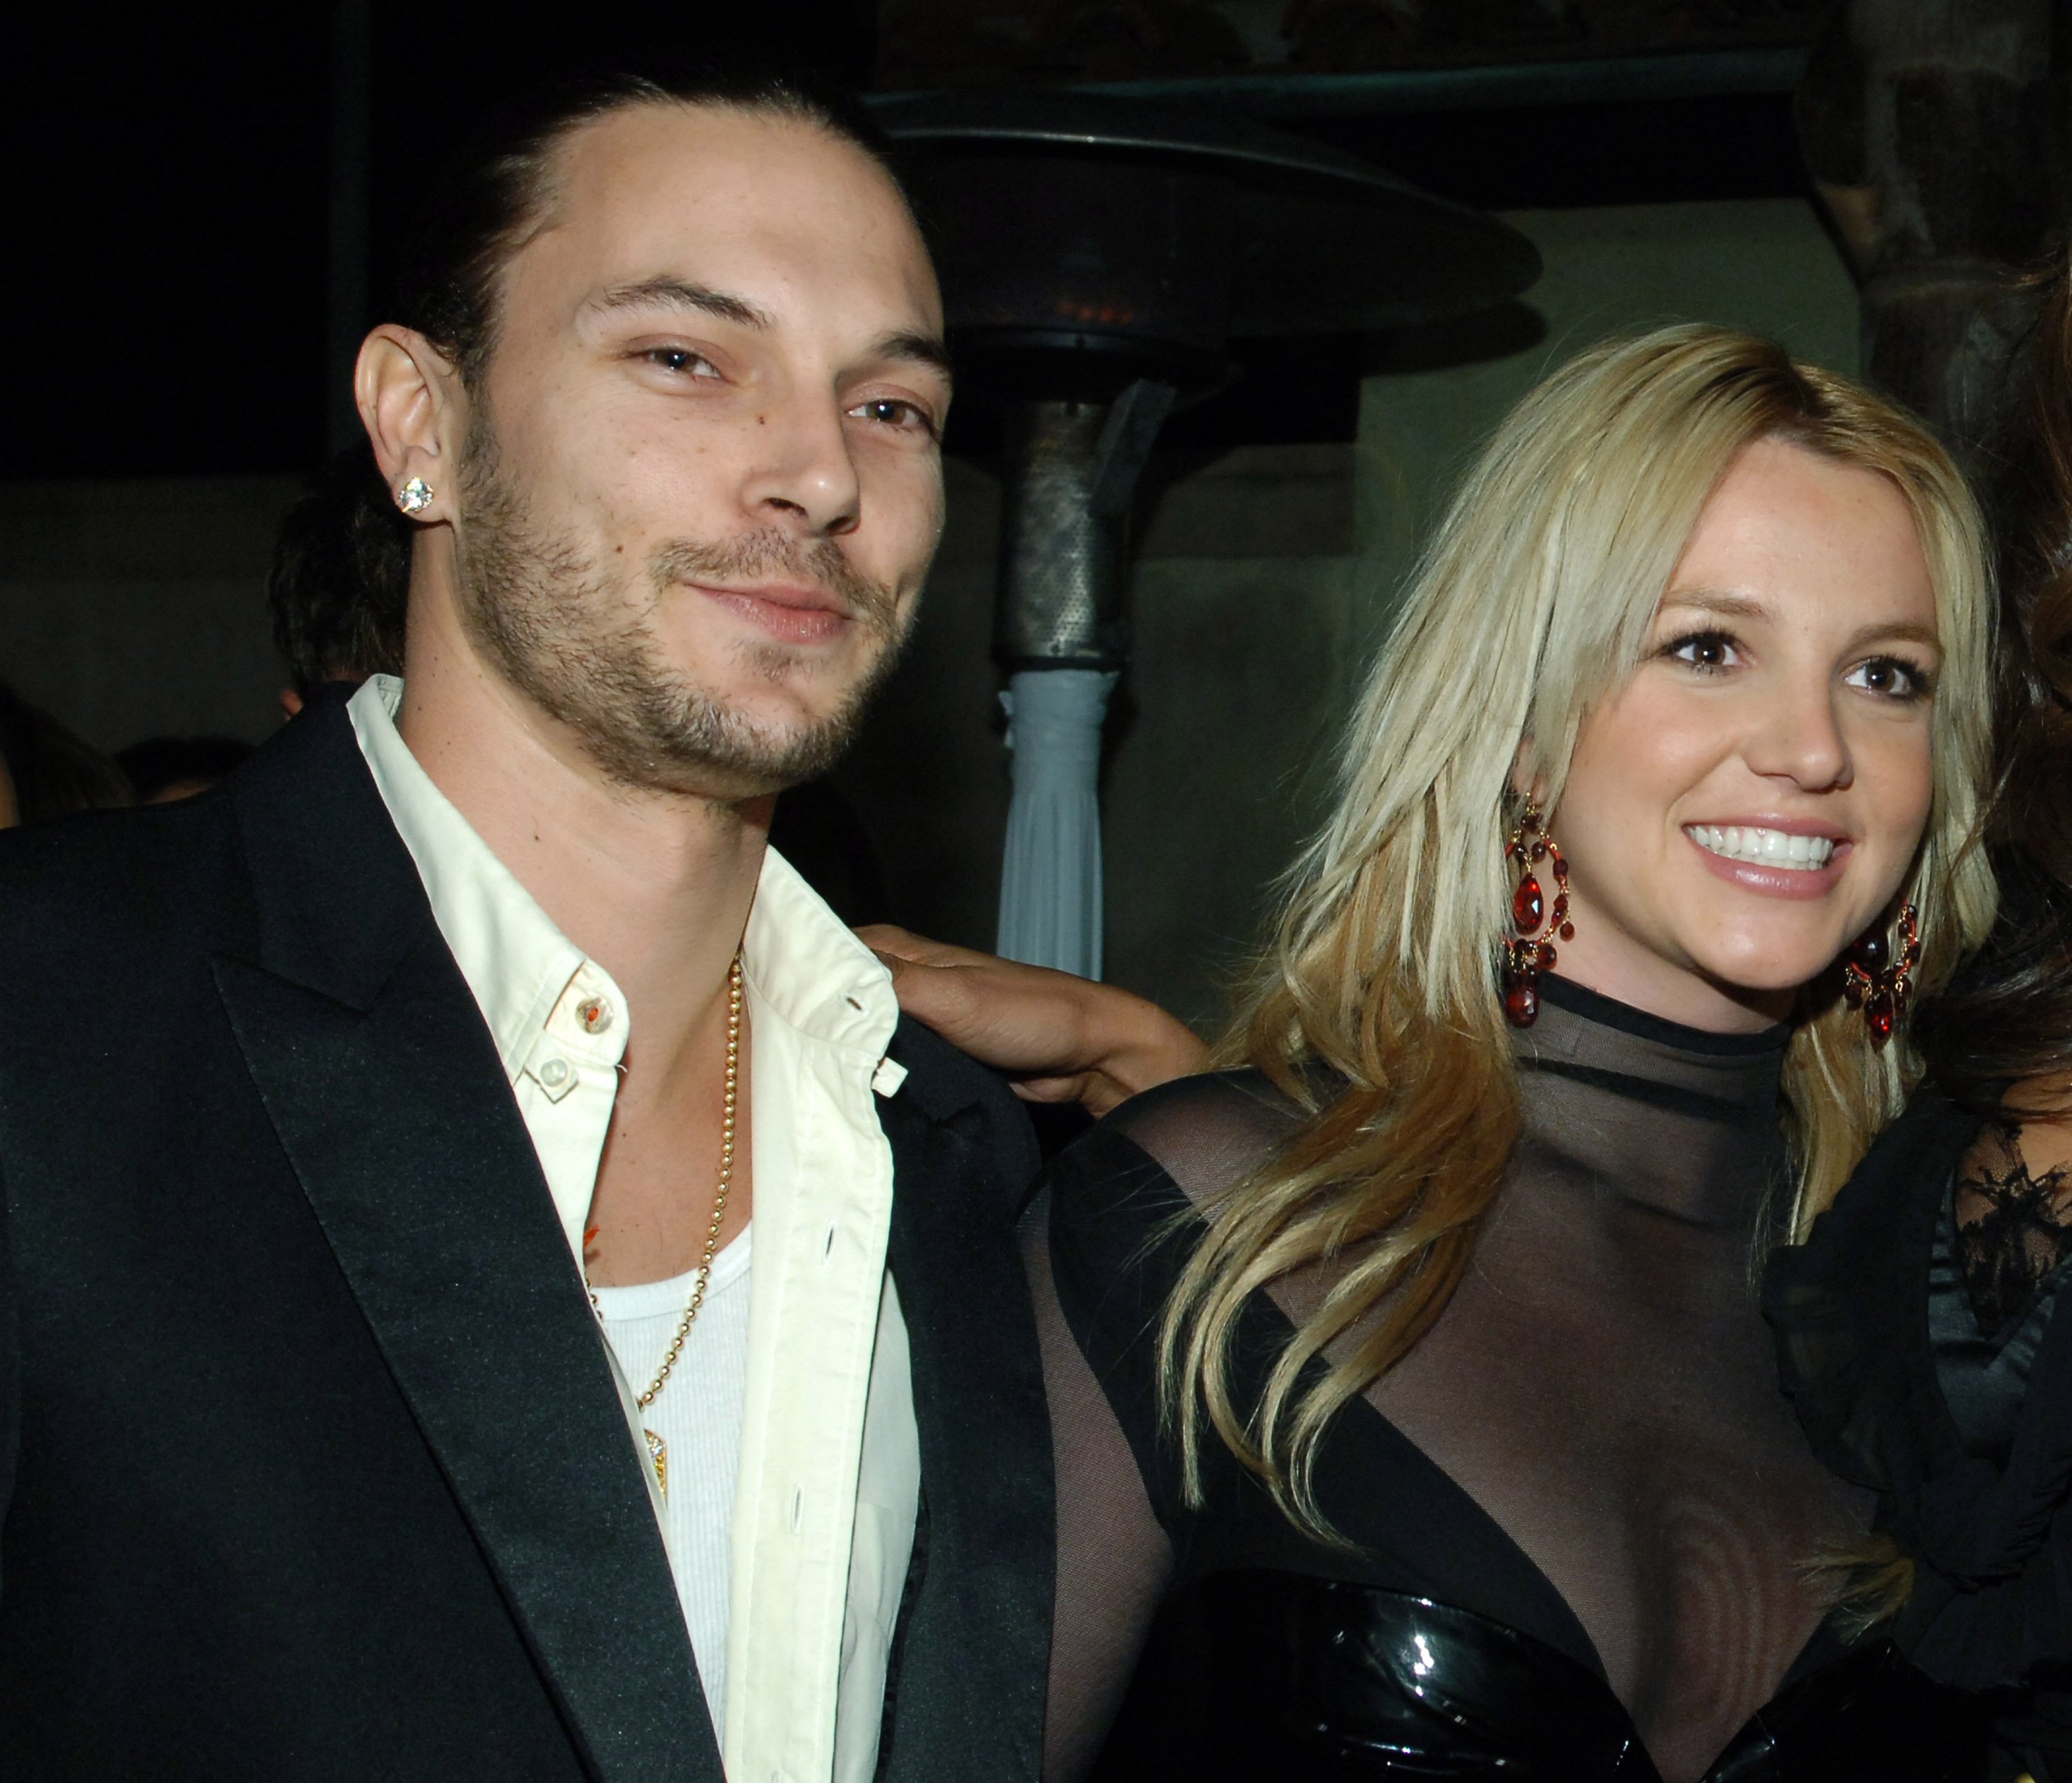 Kevin Federline and Britney Spears during Mariah Carey and Jermaine Dupri Host GRAMMY After Party Sponsored by LG at Private Home in Hollywood, California, United States. | Source: Getty Images